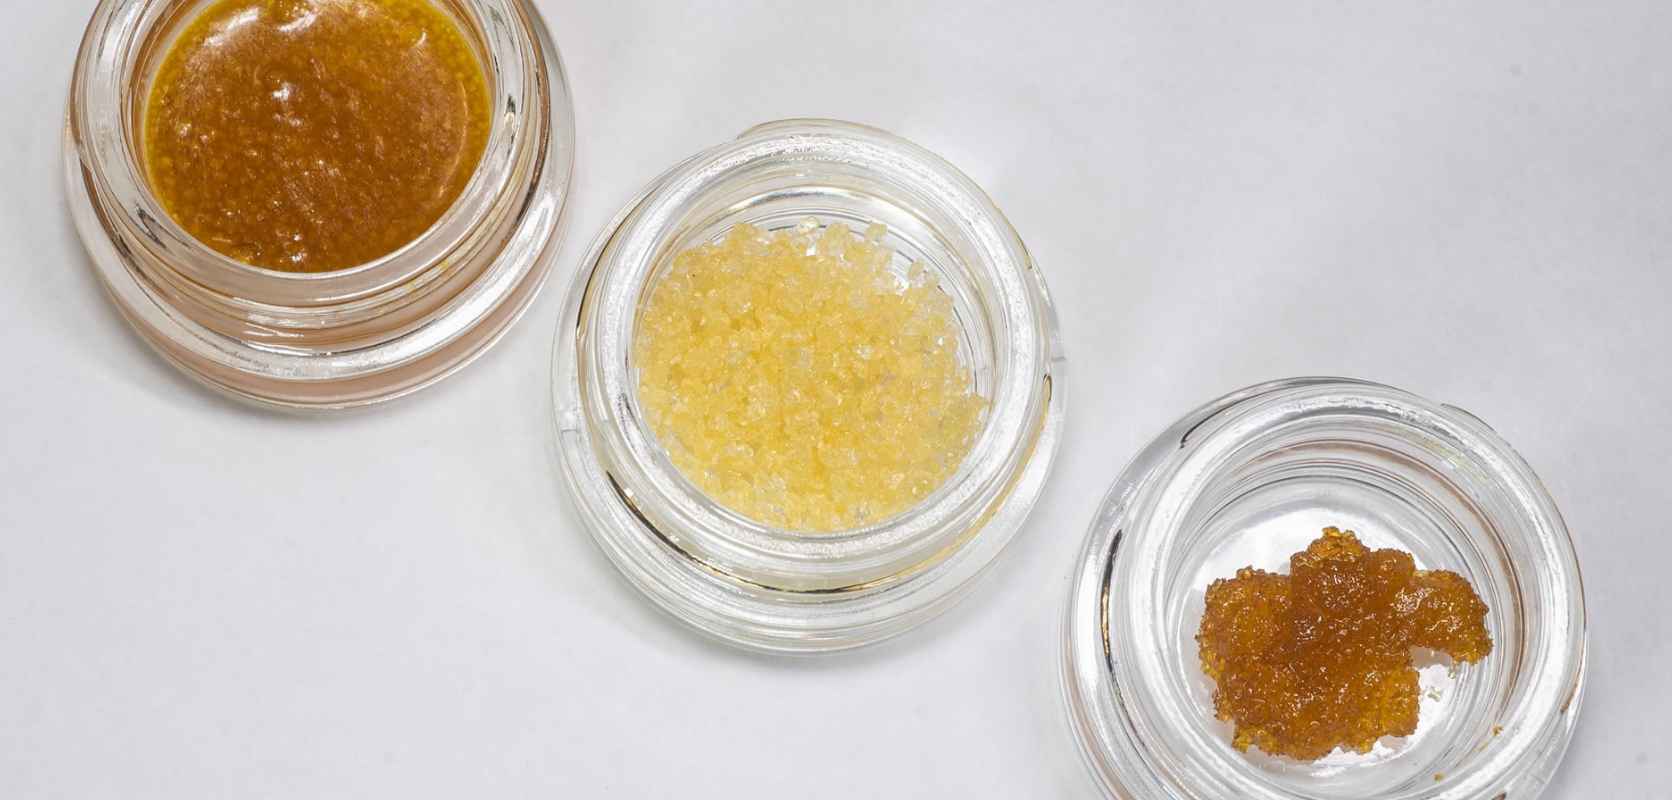 If you're experienced in making cannabis concentrates, you may like mixing strains to create a blend using complementary strains. 